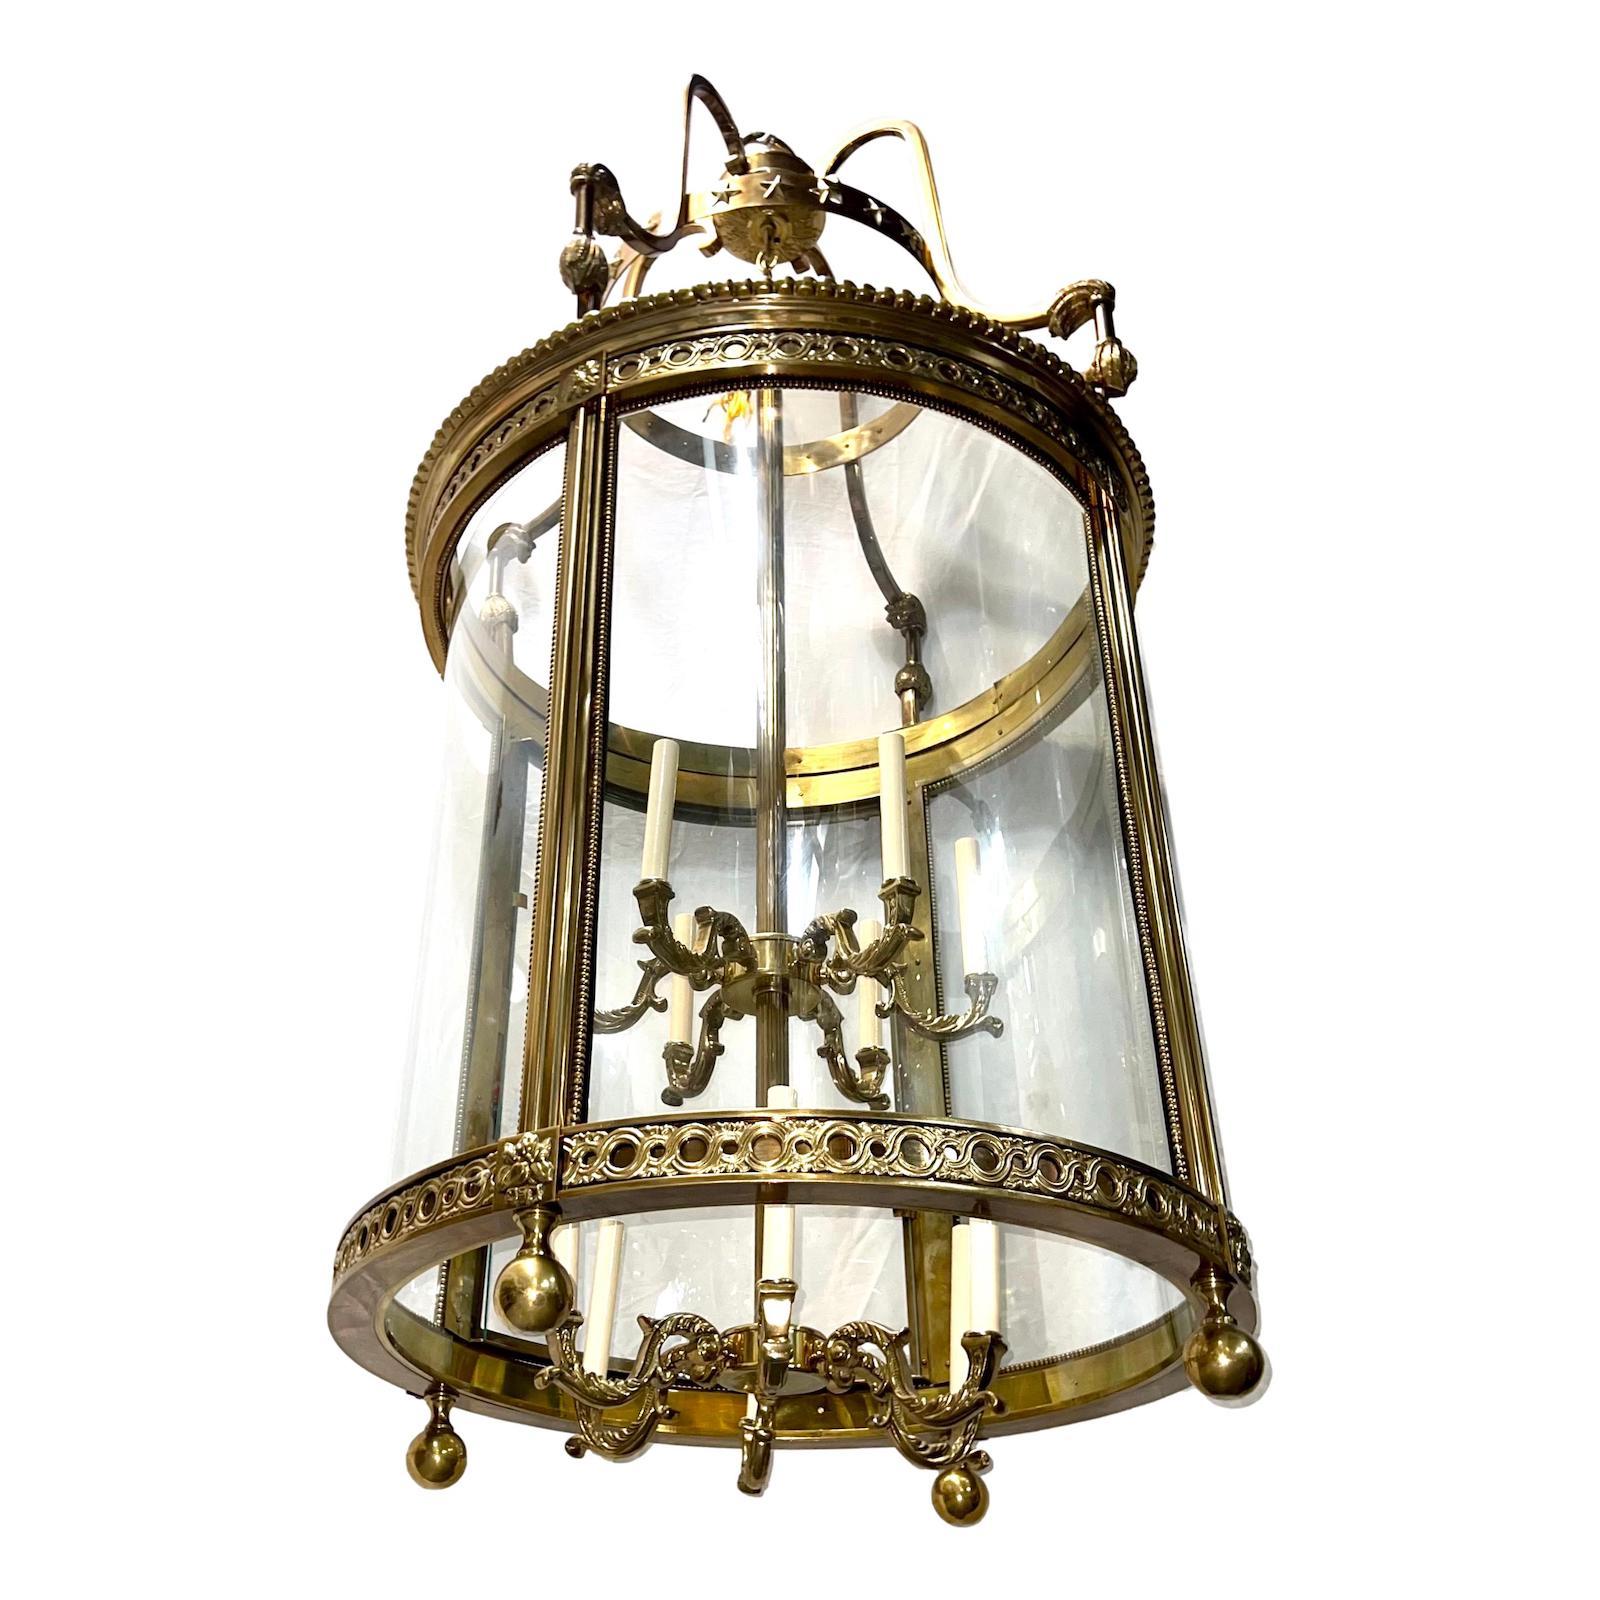 A circa 1930's French Neoclassic style gilt bronze lantern with double interior cluster. The body has detailed cast beading and tassel work and bent glass insets.

Measurements
Height of body: 62